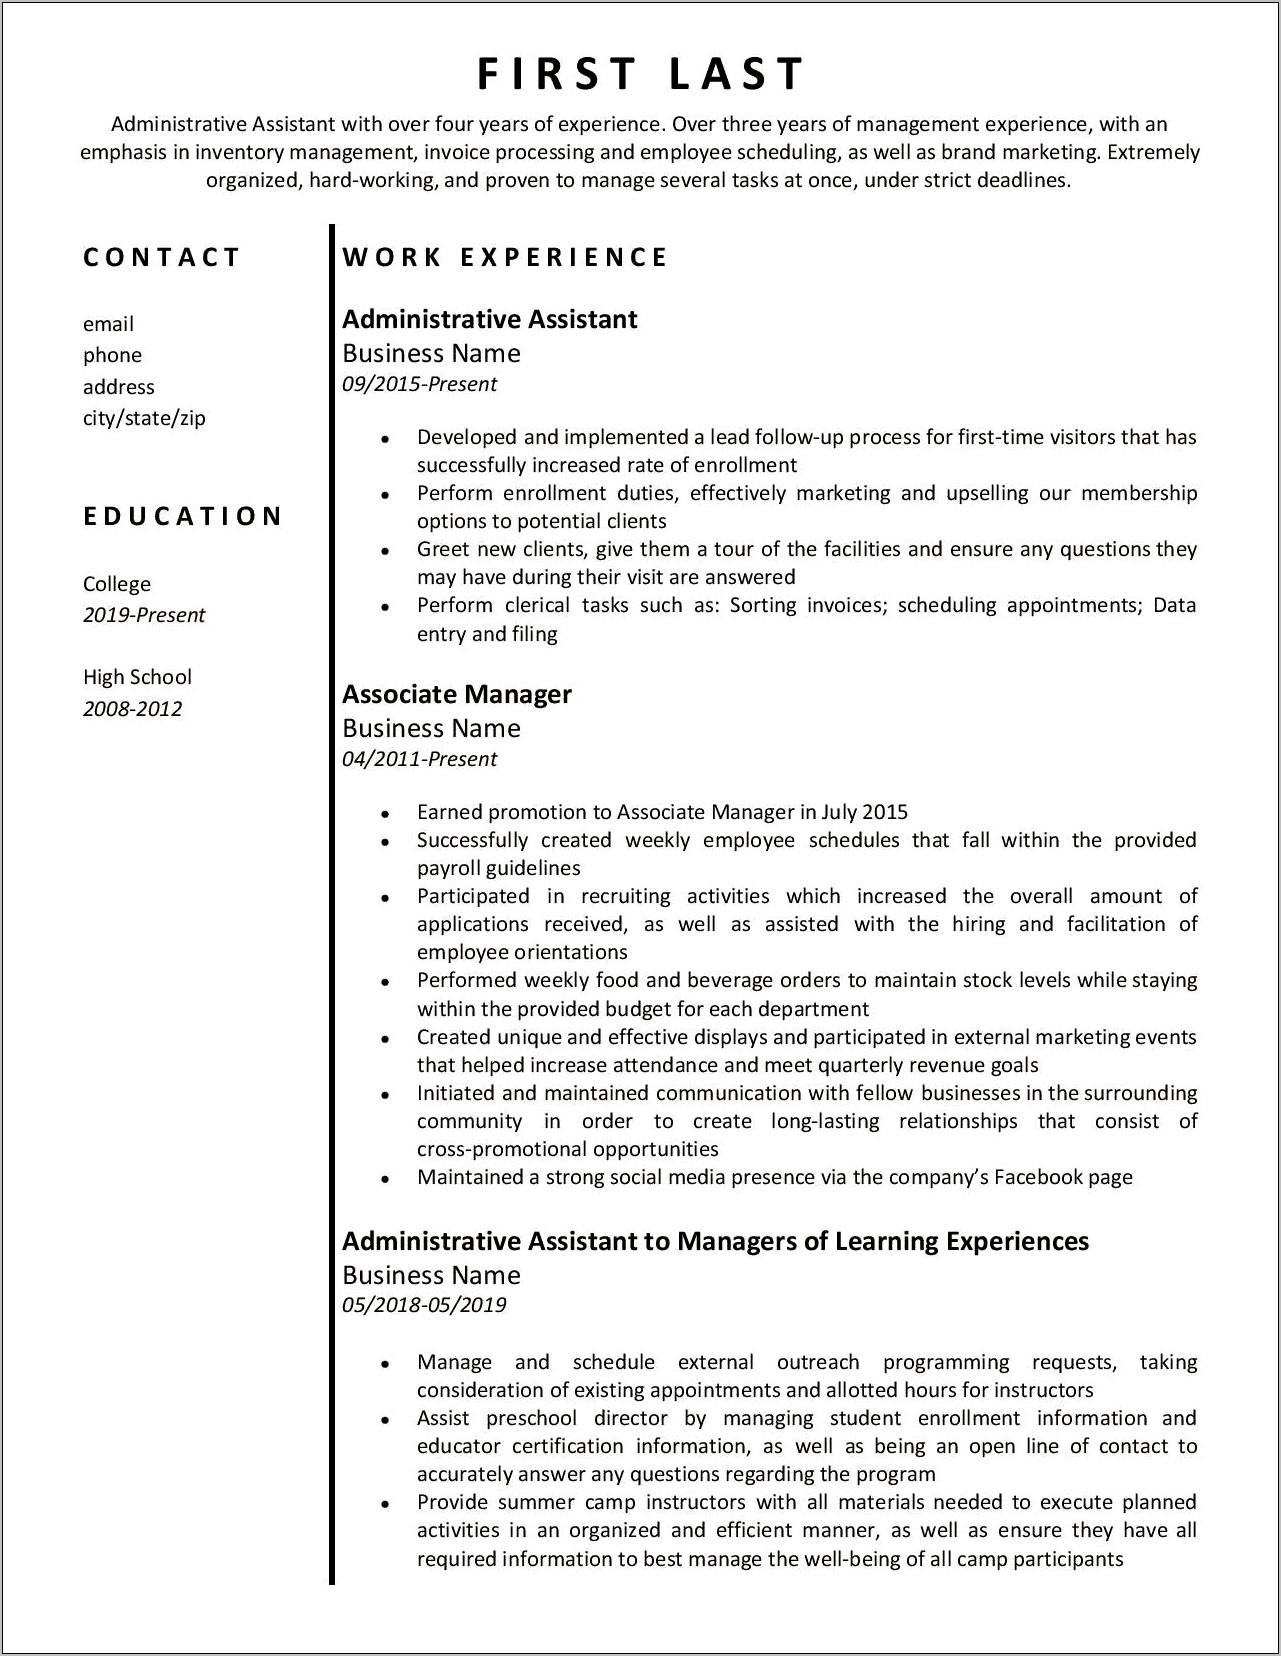 Resume Job Title First Or Company